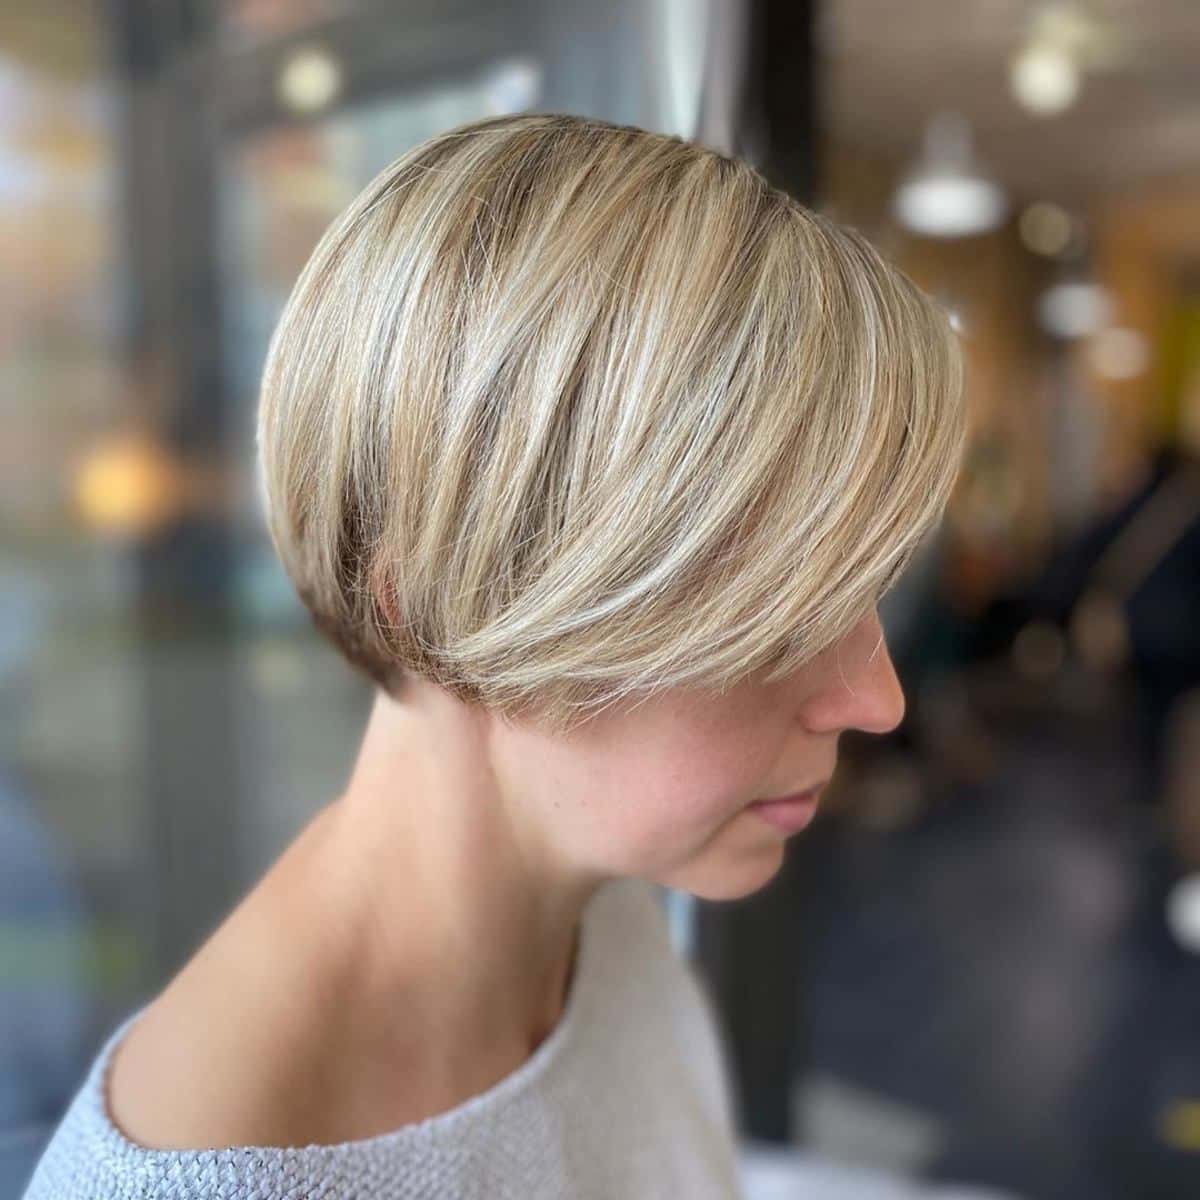 27 Trendiest Ways to Have a Short Blonde Bob Right Now